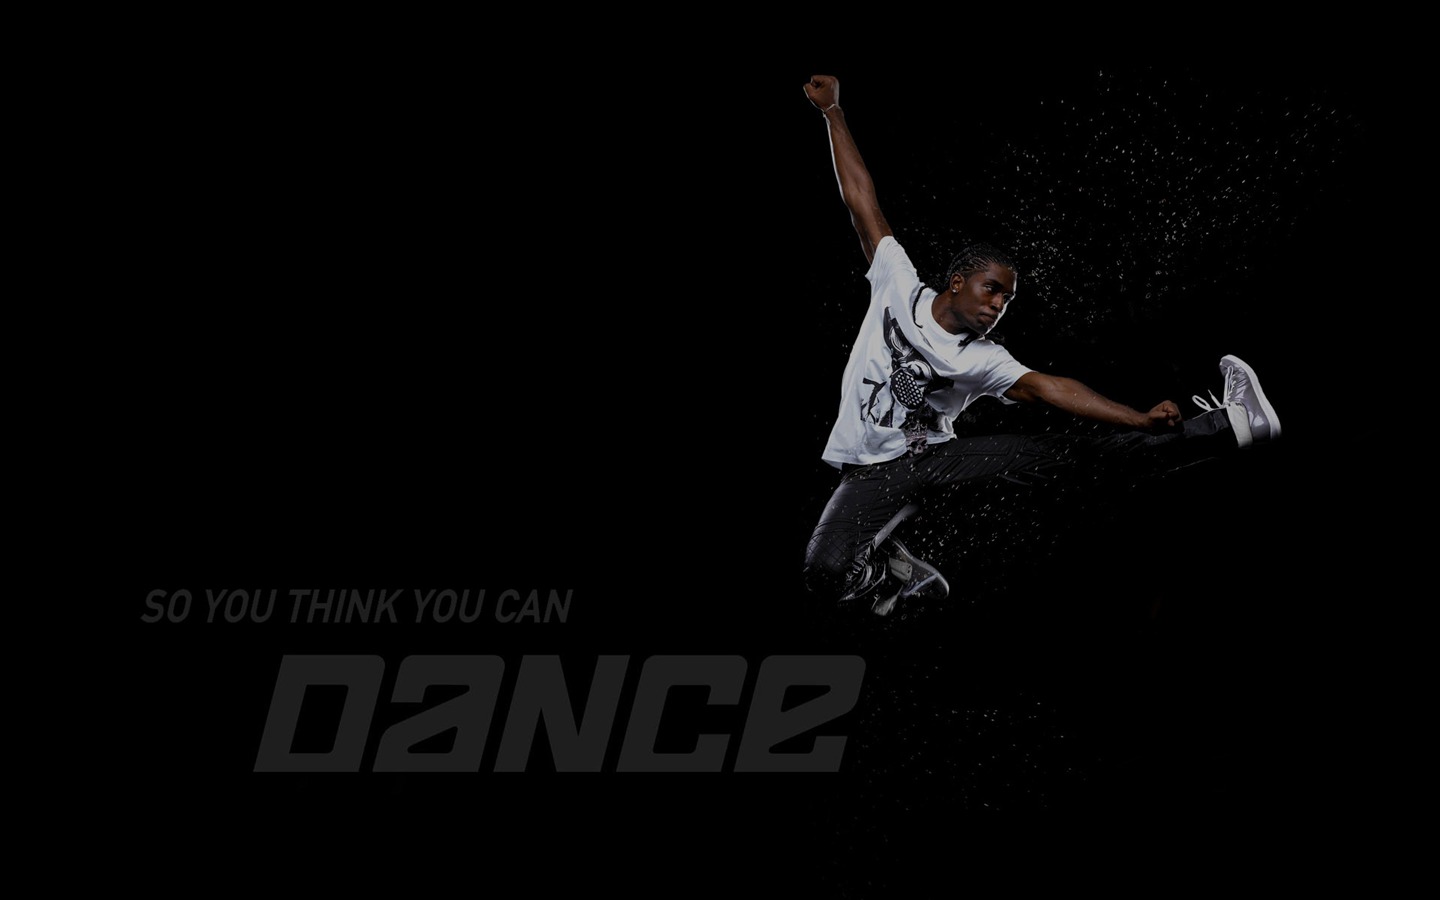 So You Think You Can Dance 舞林爭霸壁紙(二) #4 - 1440x900